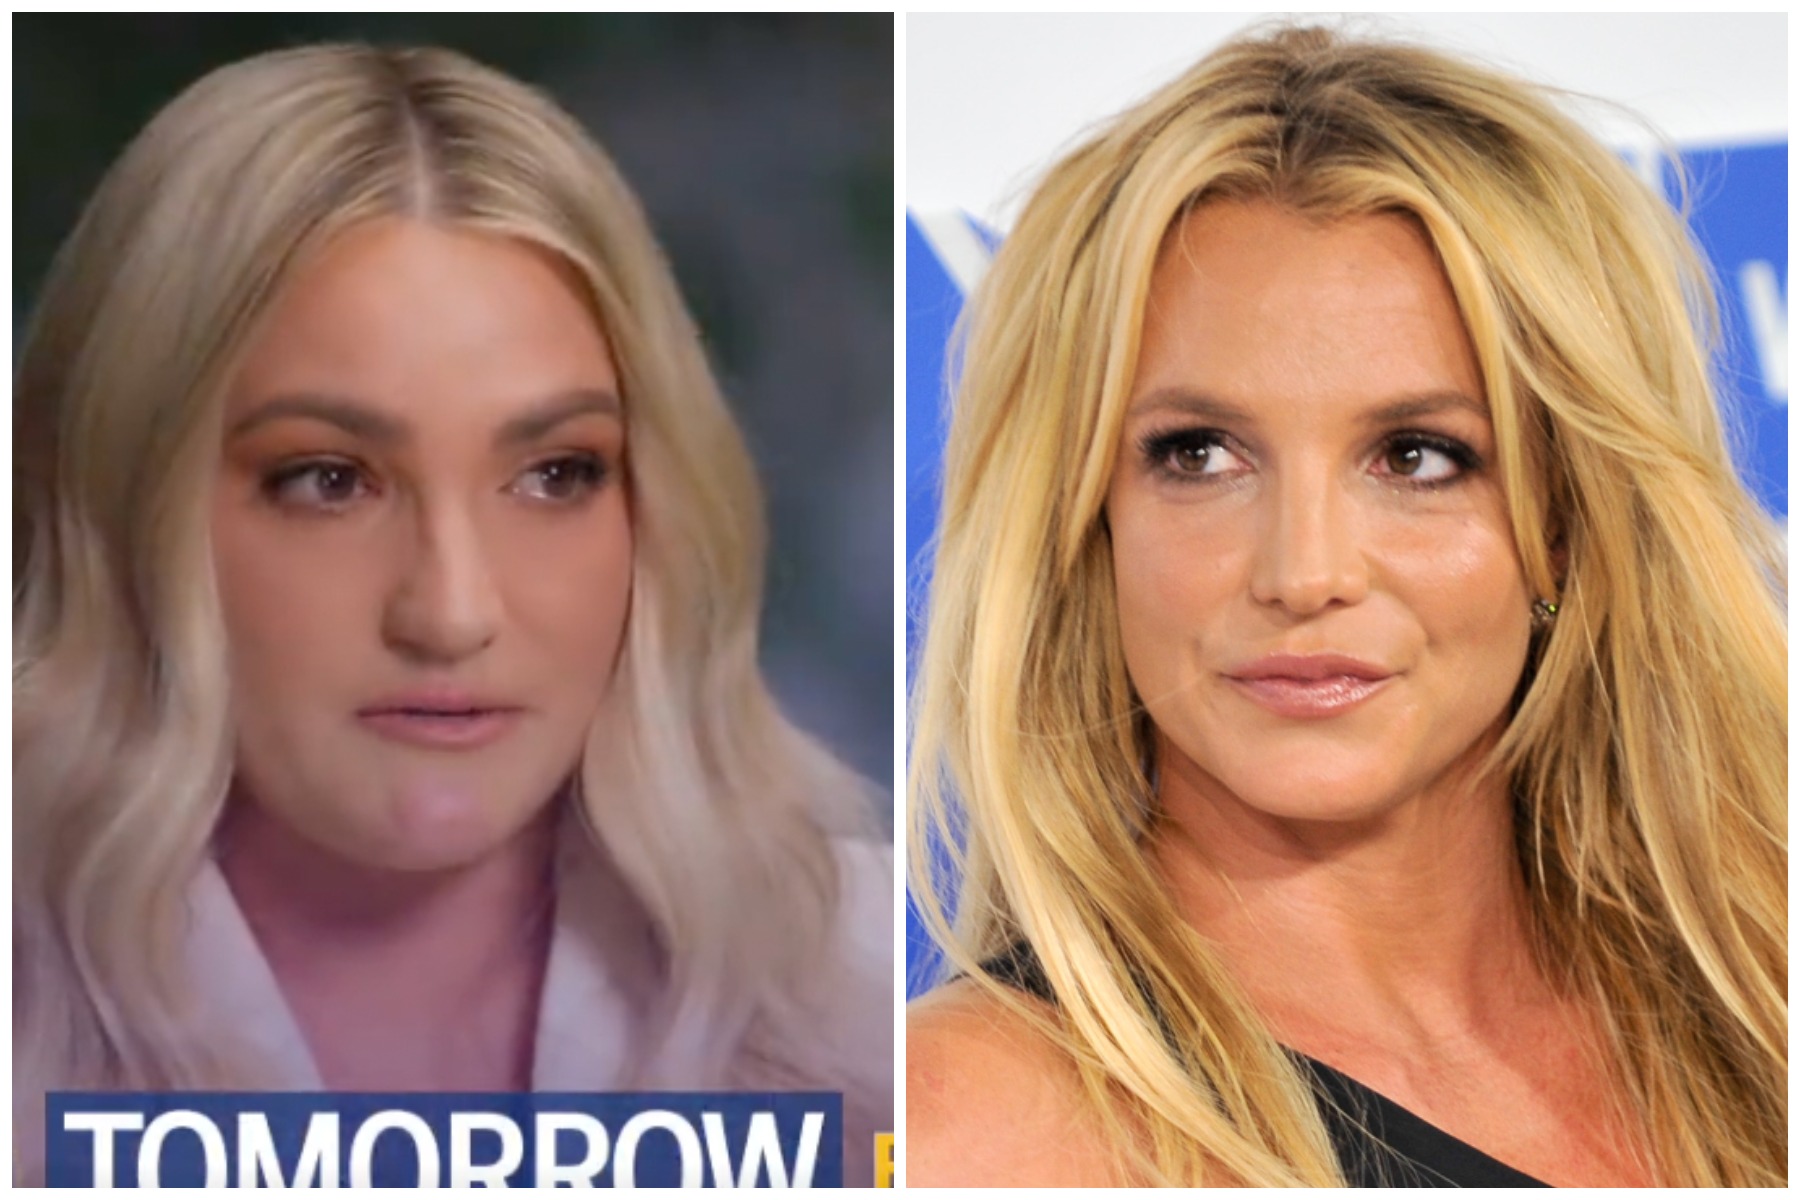 Does Jamie Lynn Spears Porn - Britney Spears Shares Cryptic Post Ahead of Jamie Lynn's 'Good Morning  America' Interview